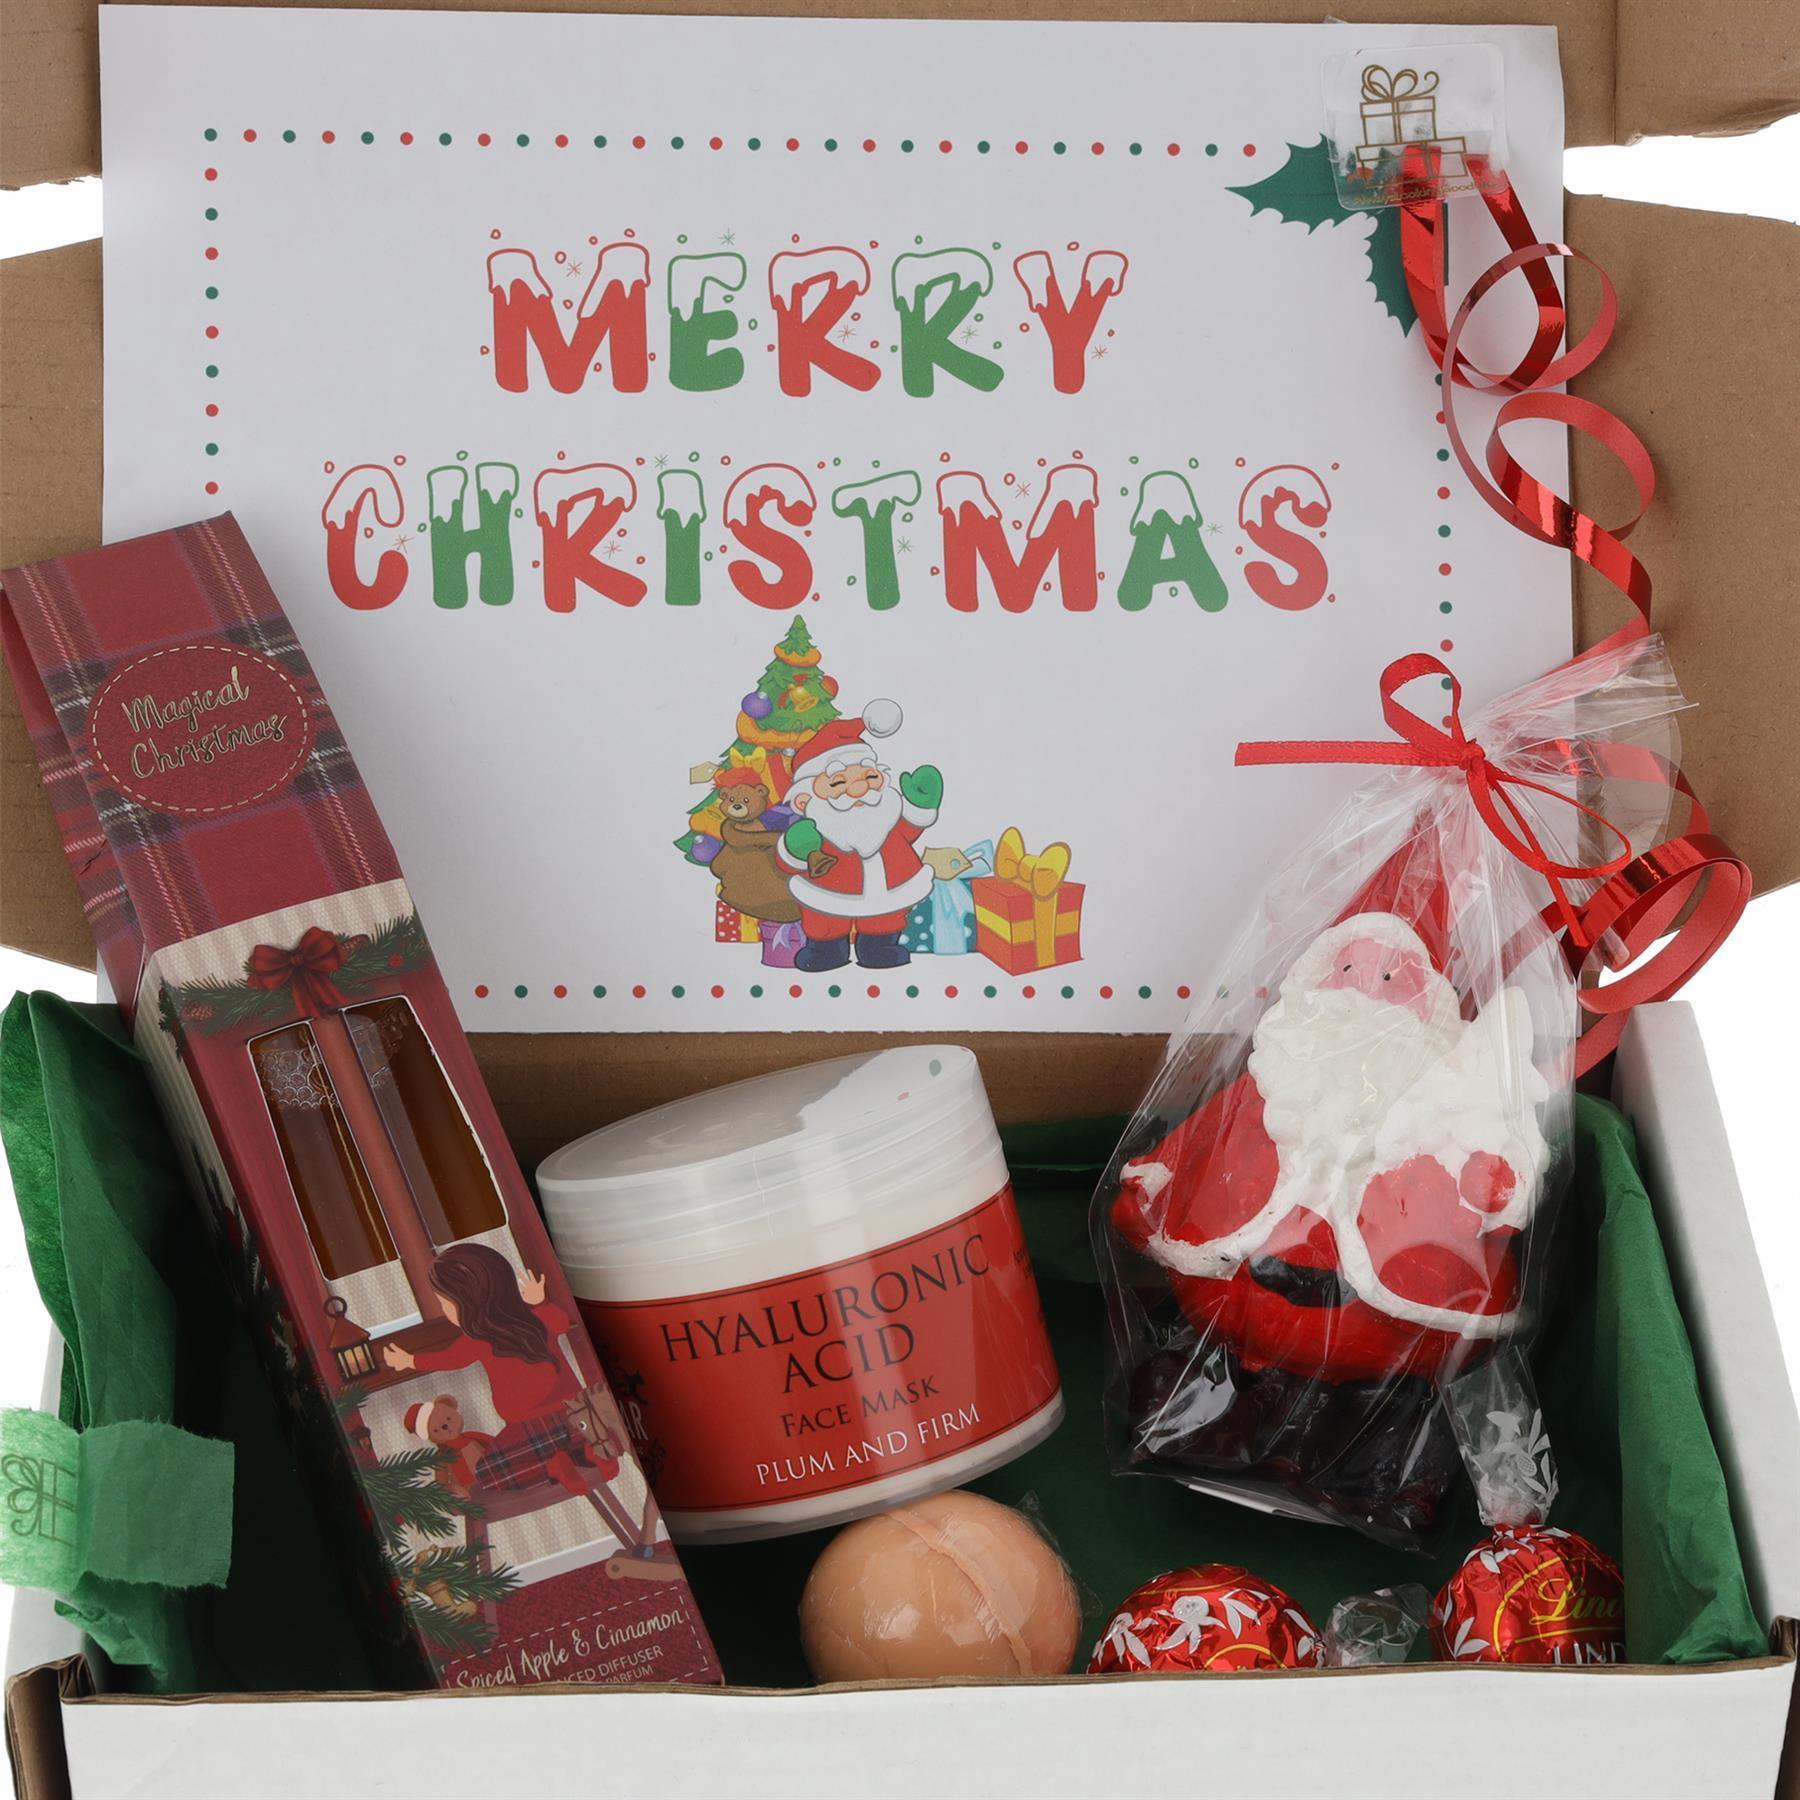 Christmas Diffuser and Candle Pamper & Chocolate Gift Box  - Always Looking Good -   